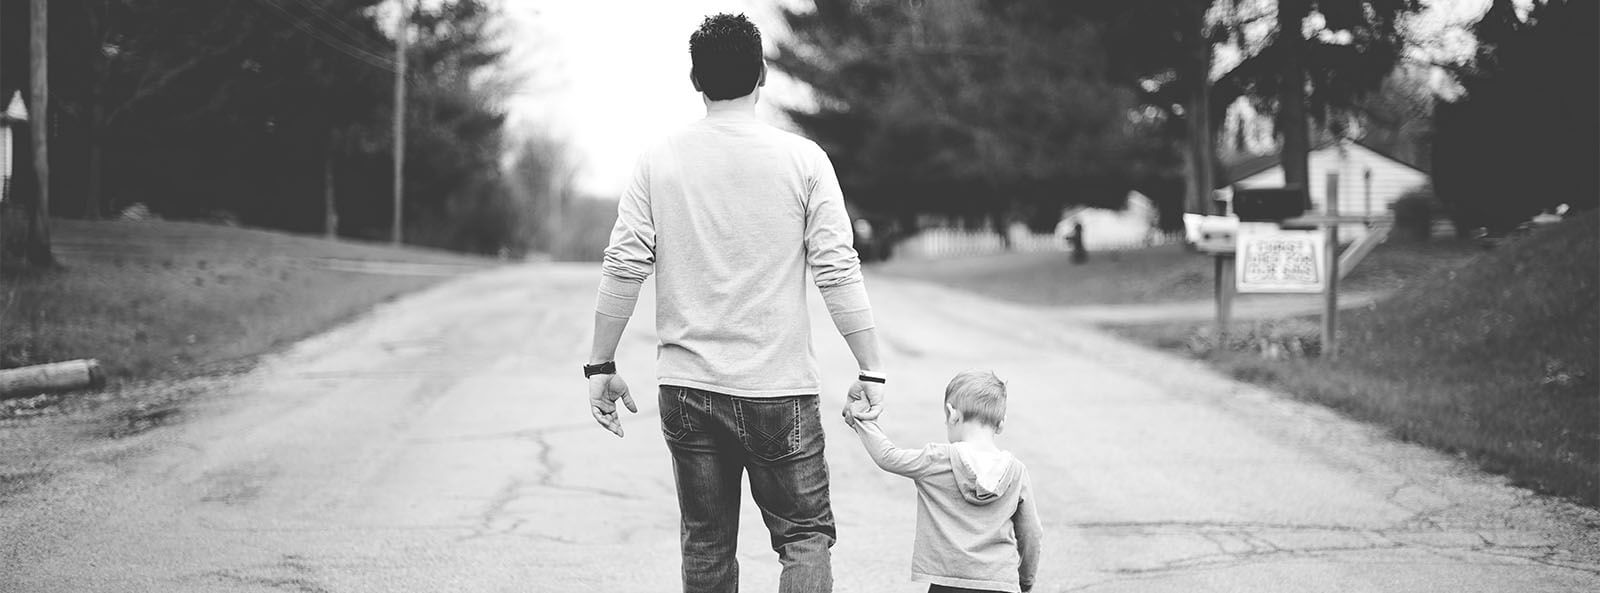 black and white photograph of a man walking down the street holding his young son's hand